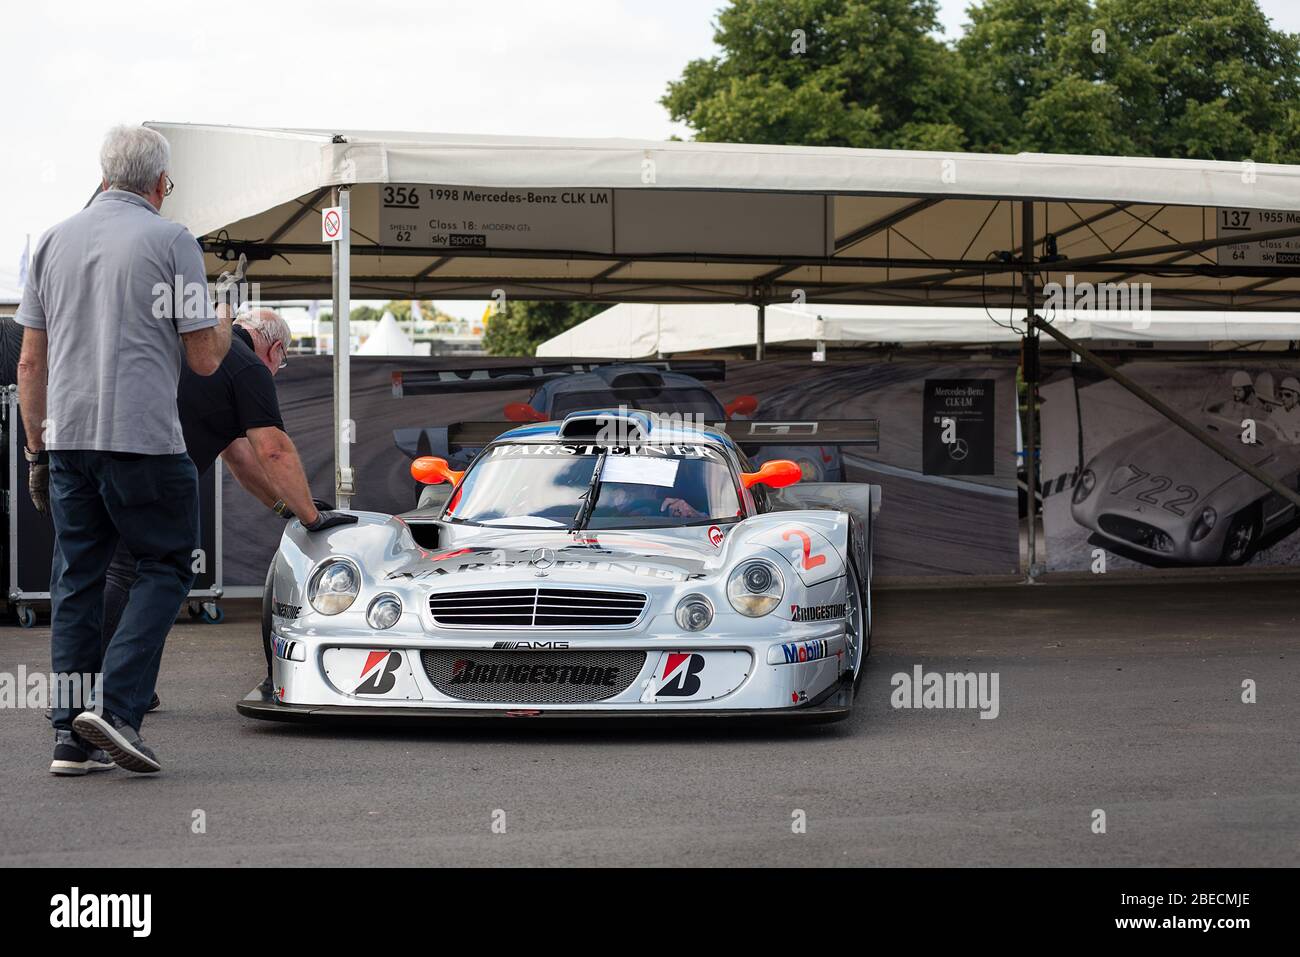 The No.2 Mercedes-AMG CLK GTR  race car being manually wheeled in to place at the Goodwood Festival of Speed car show. Stock Photo